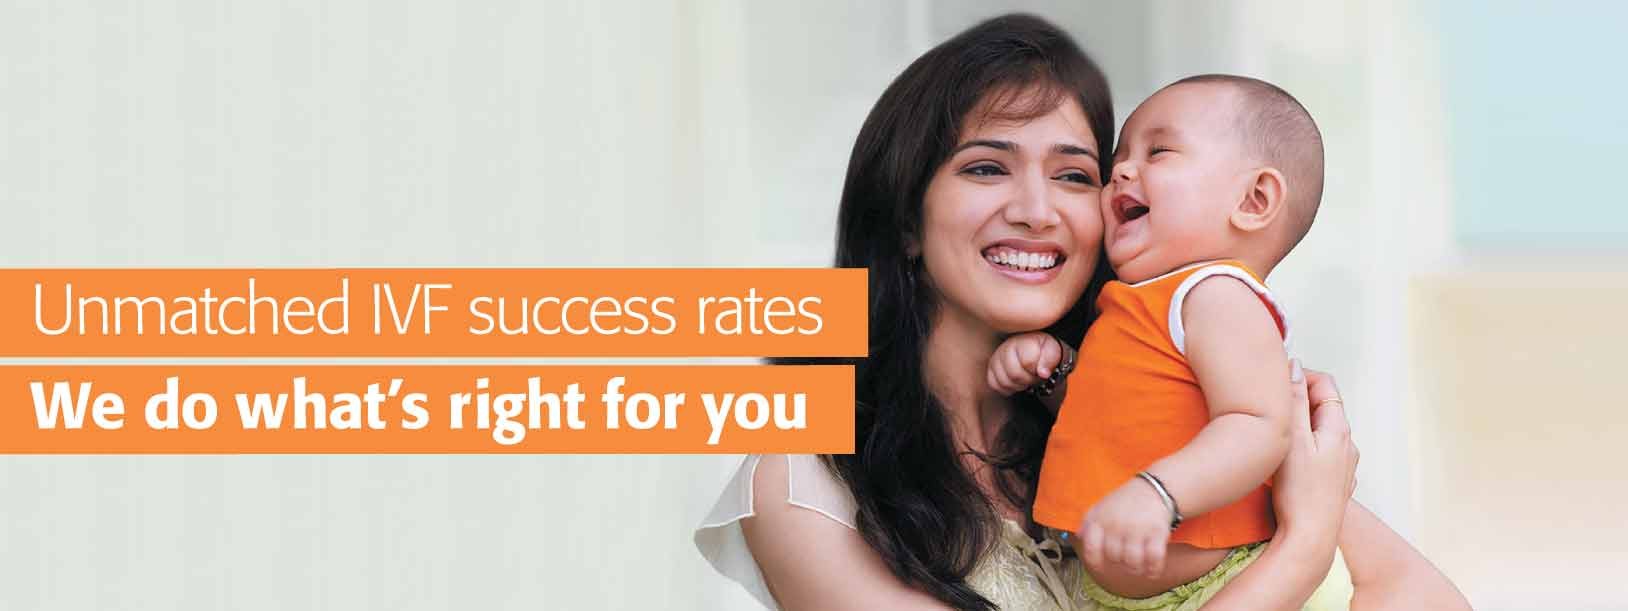 Unmatched IVF success rates. We do what's right for you